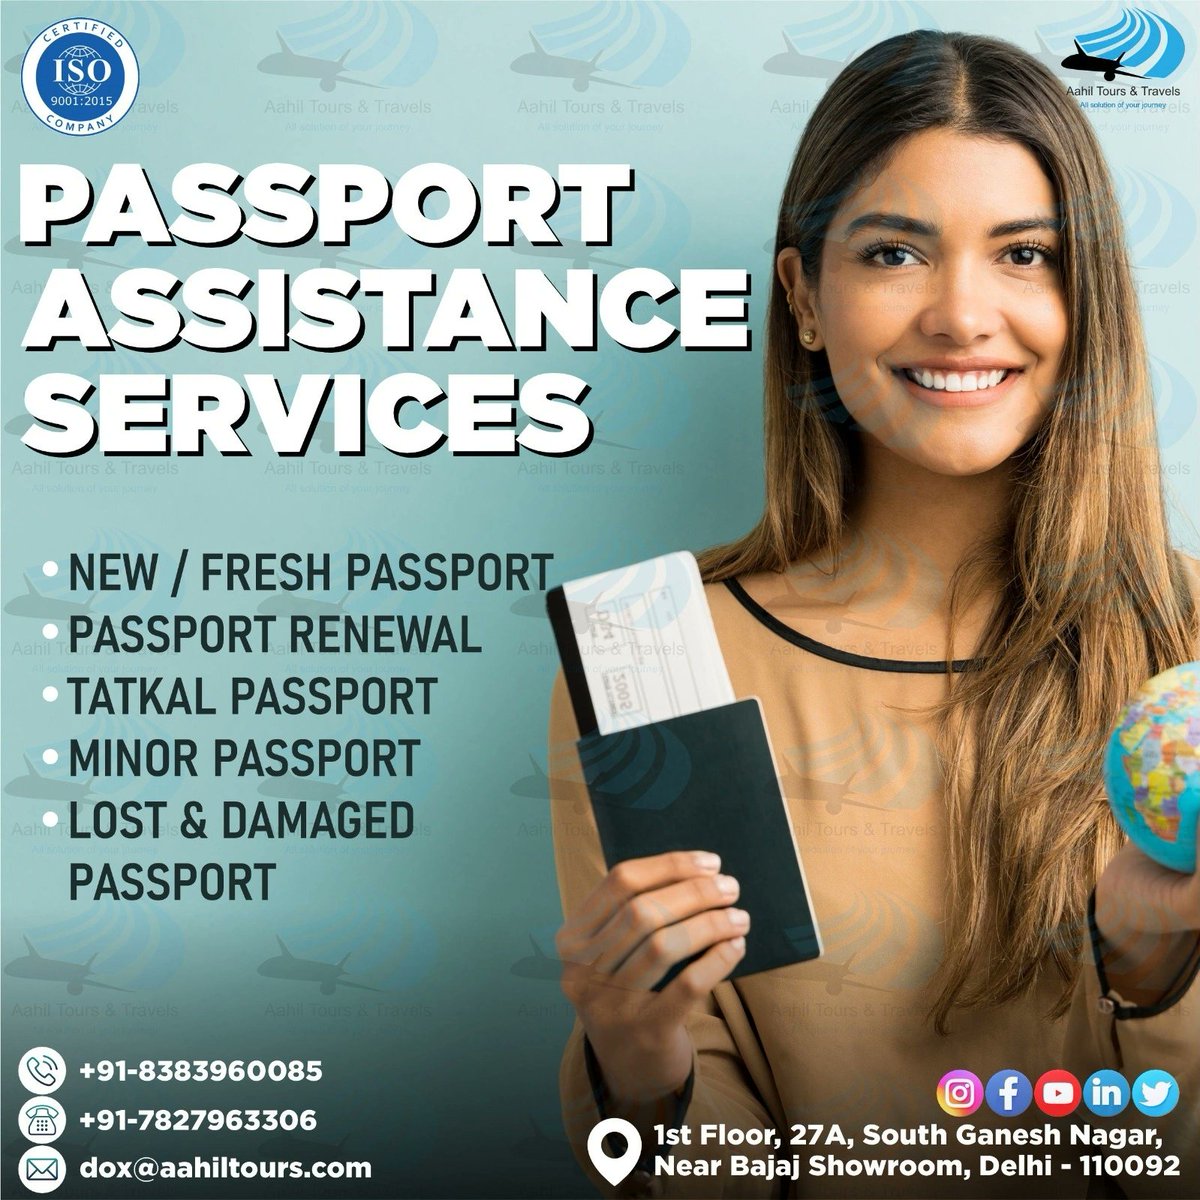 Get best rate and fast service in a single call. Details are mentioned in flyer. For more information click on the link wa.me/918383960085
#aahiltour  #assistanceservices #newpassport #minorpassport  #TatkalPassport #passportrenewal  #contactusformoreinfo